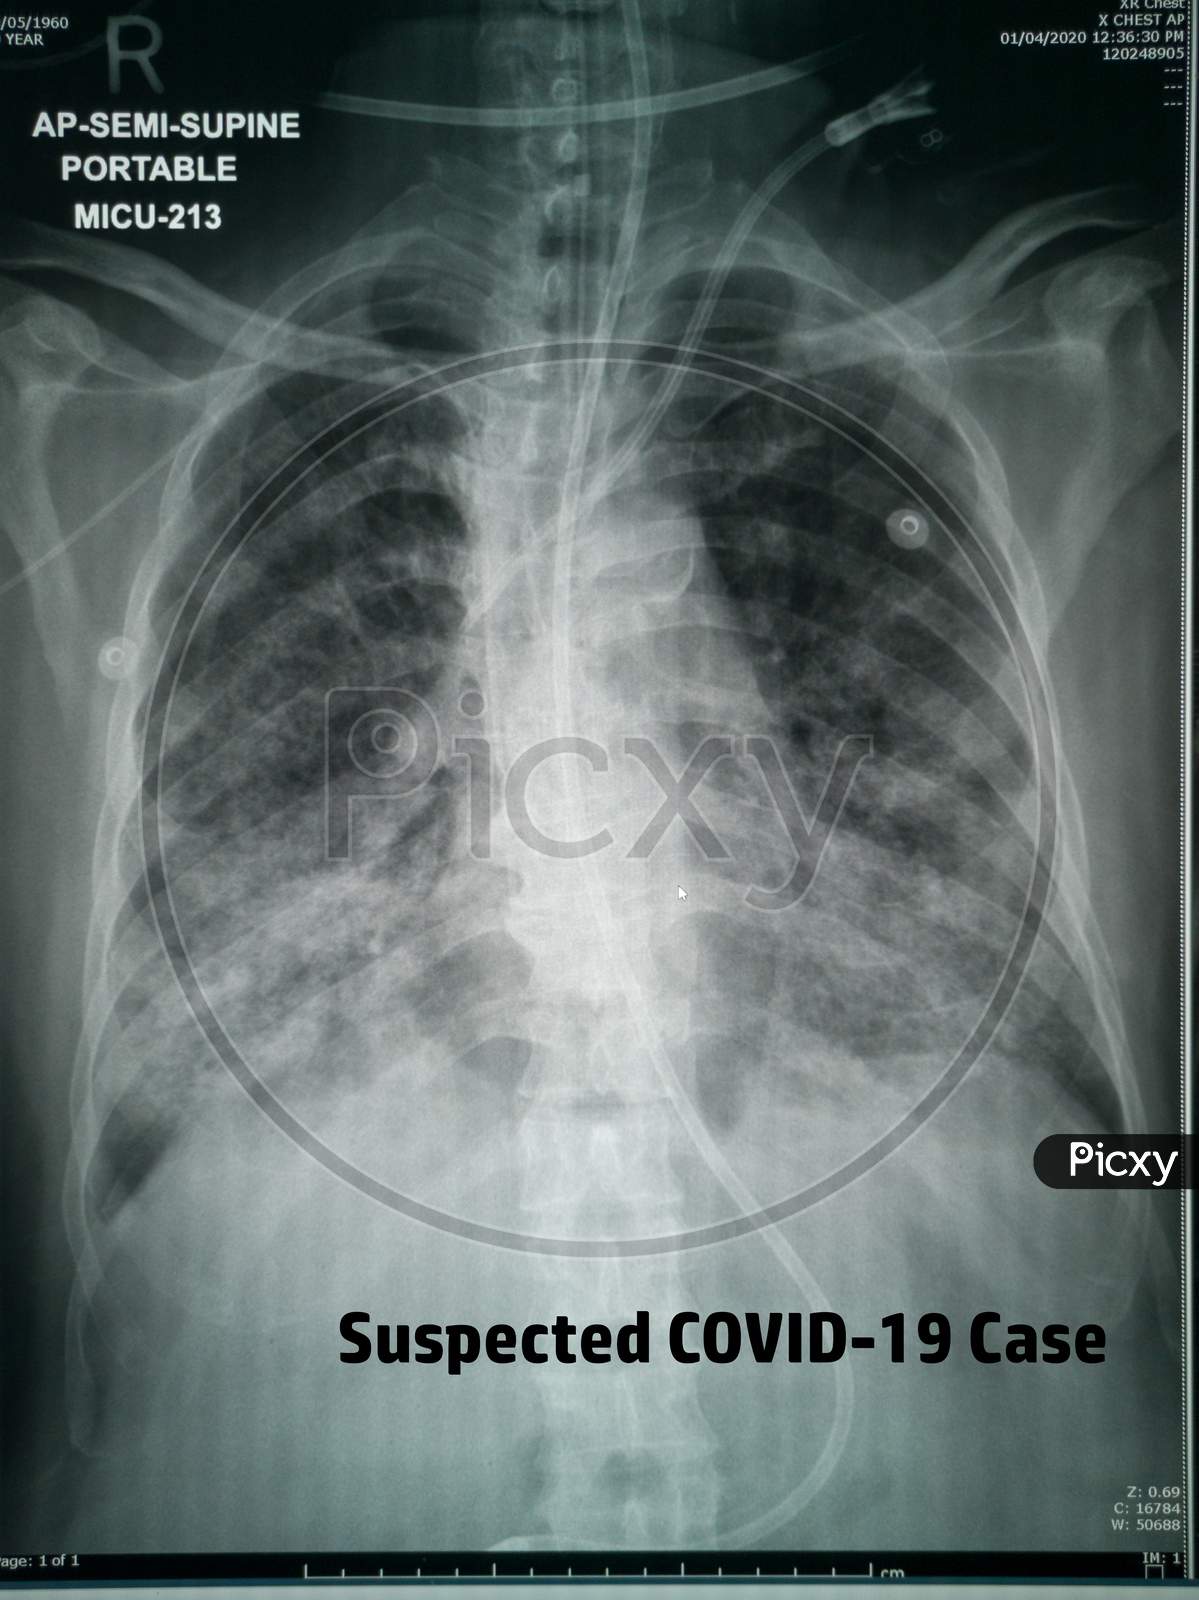 Chest X-Ray of suspected Corona virus patient high quality image showing changes in the lung due to Covid-19 virus with chest tubes